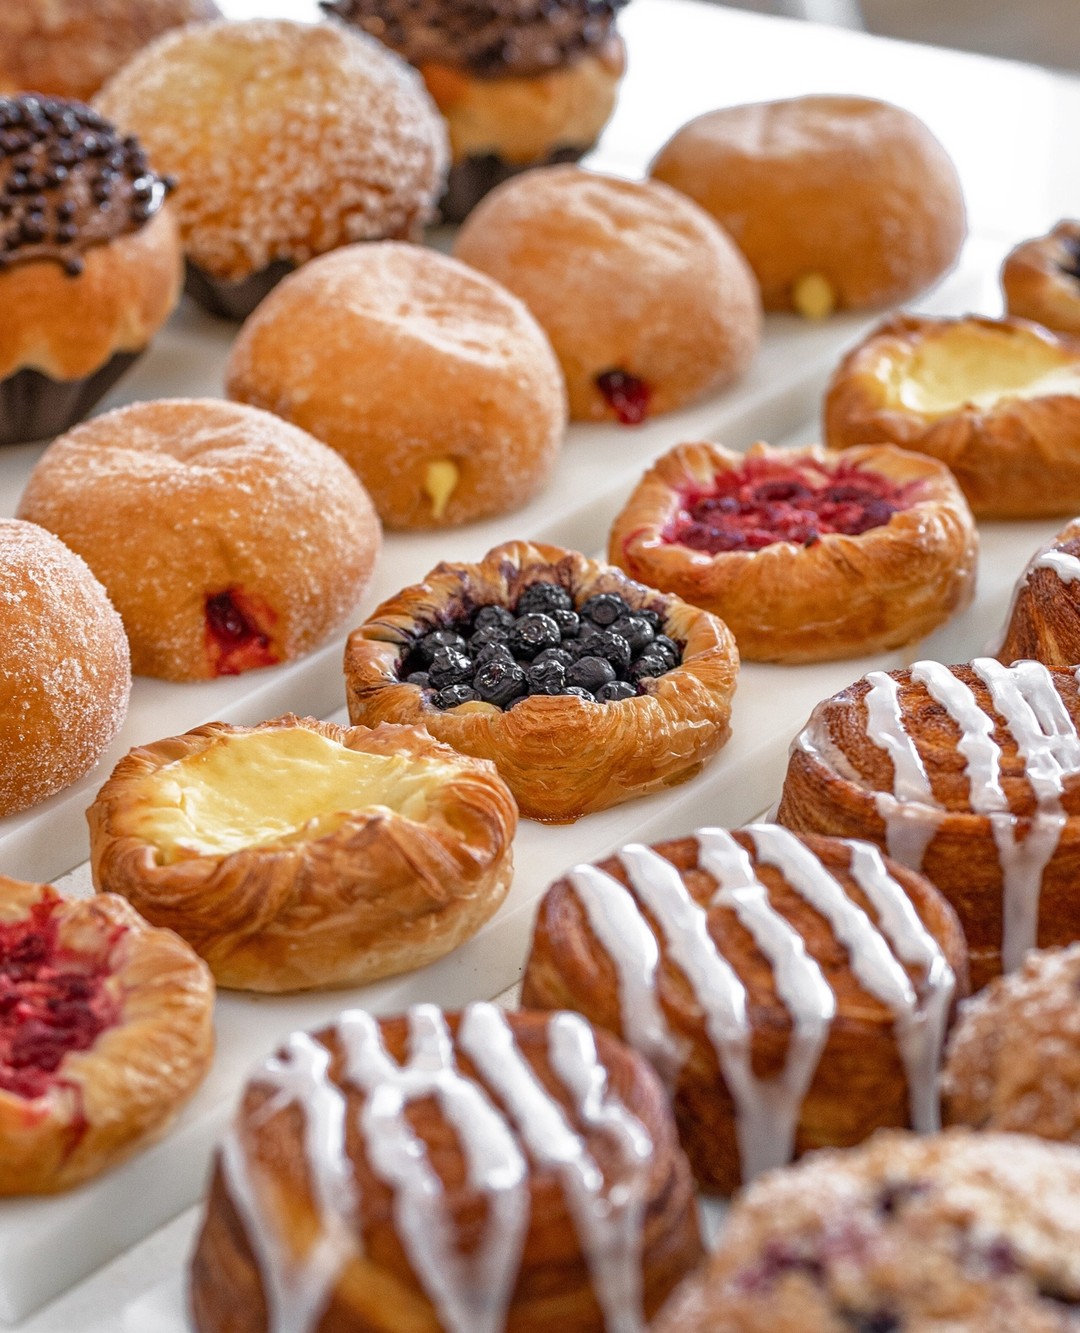 A variety of pastries